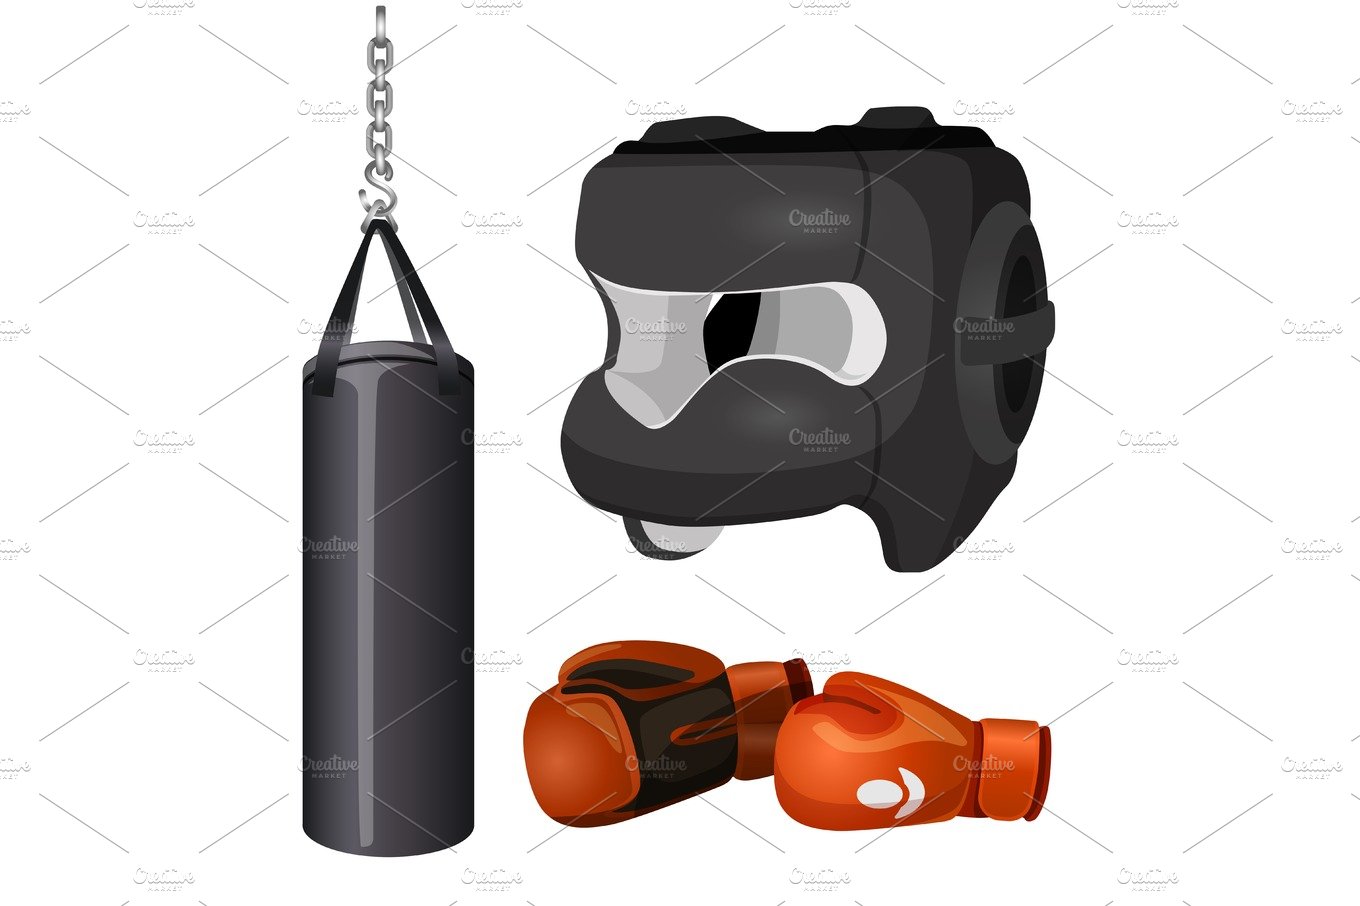 Boxing equipment punchbag on chain, protective headgear mask, leather gloves cover image.